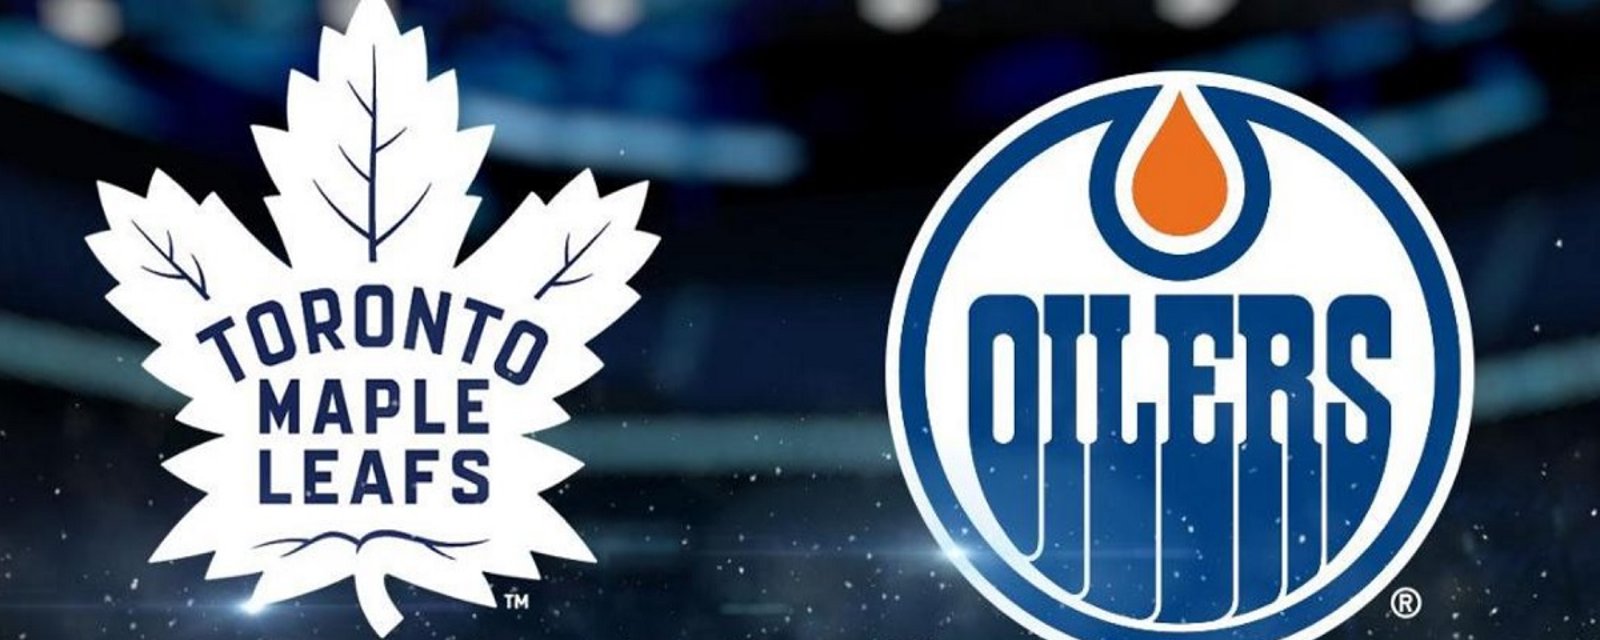 Oilers &amp;amp; Leafs forced to cancel today's events under direction from NHL.